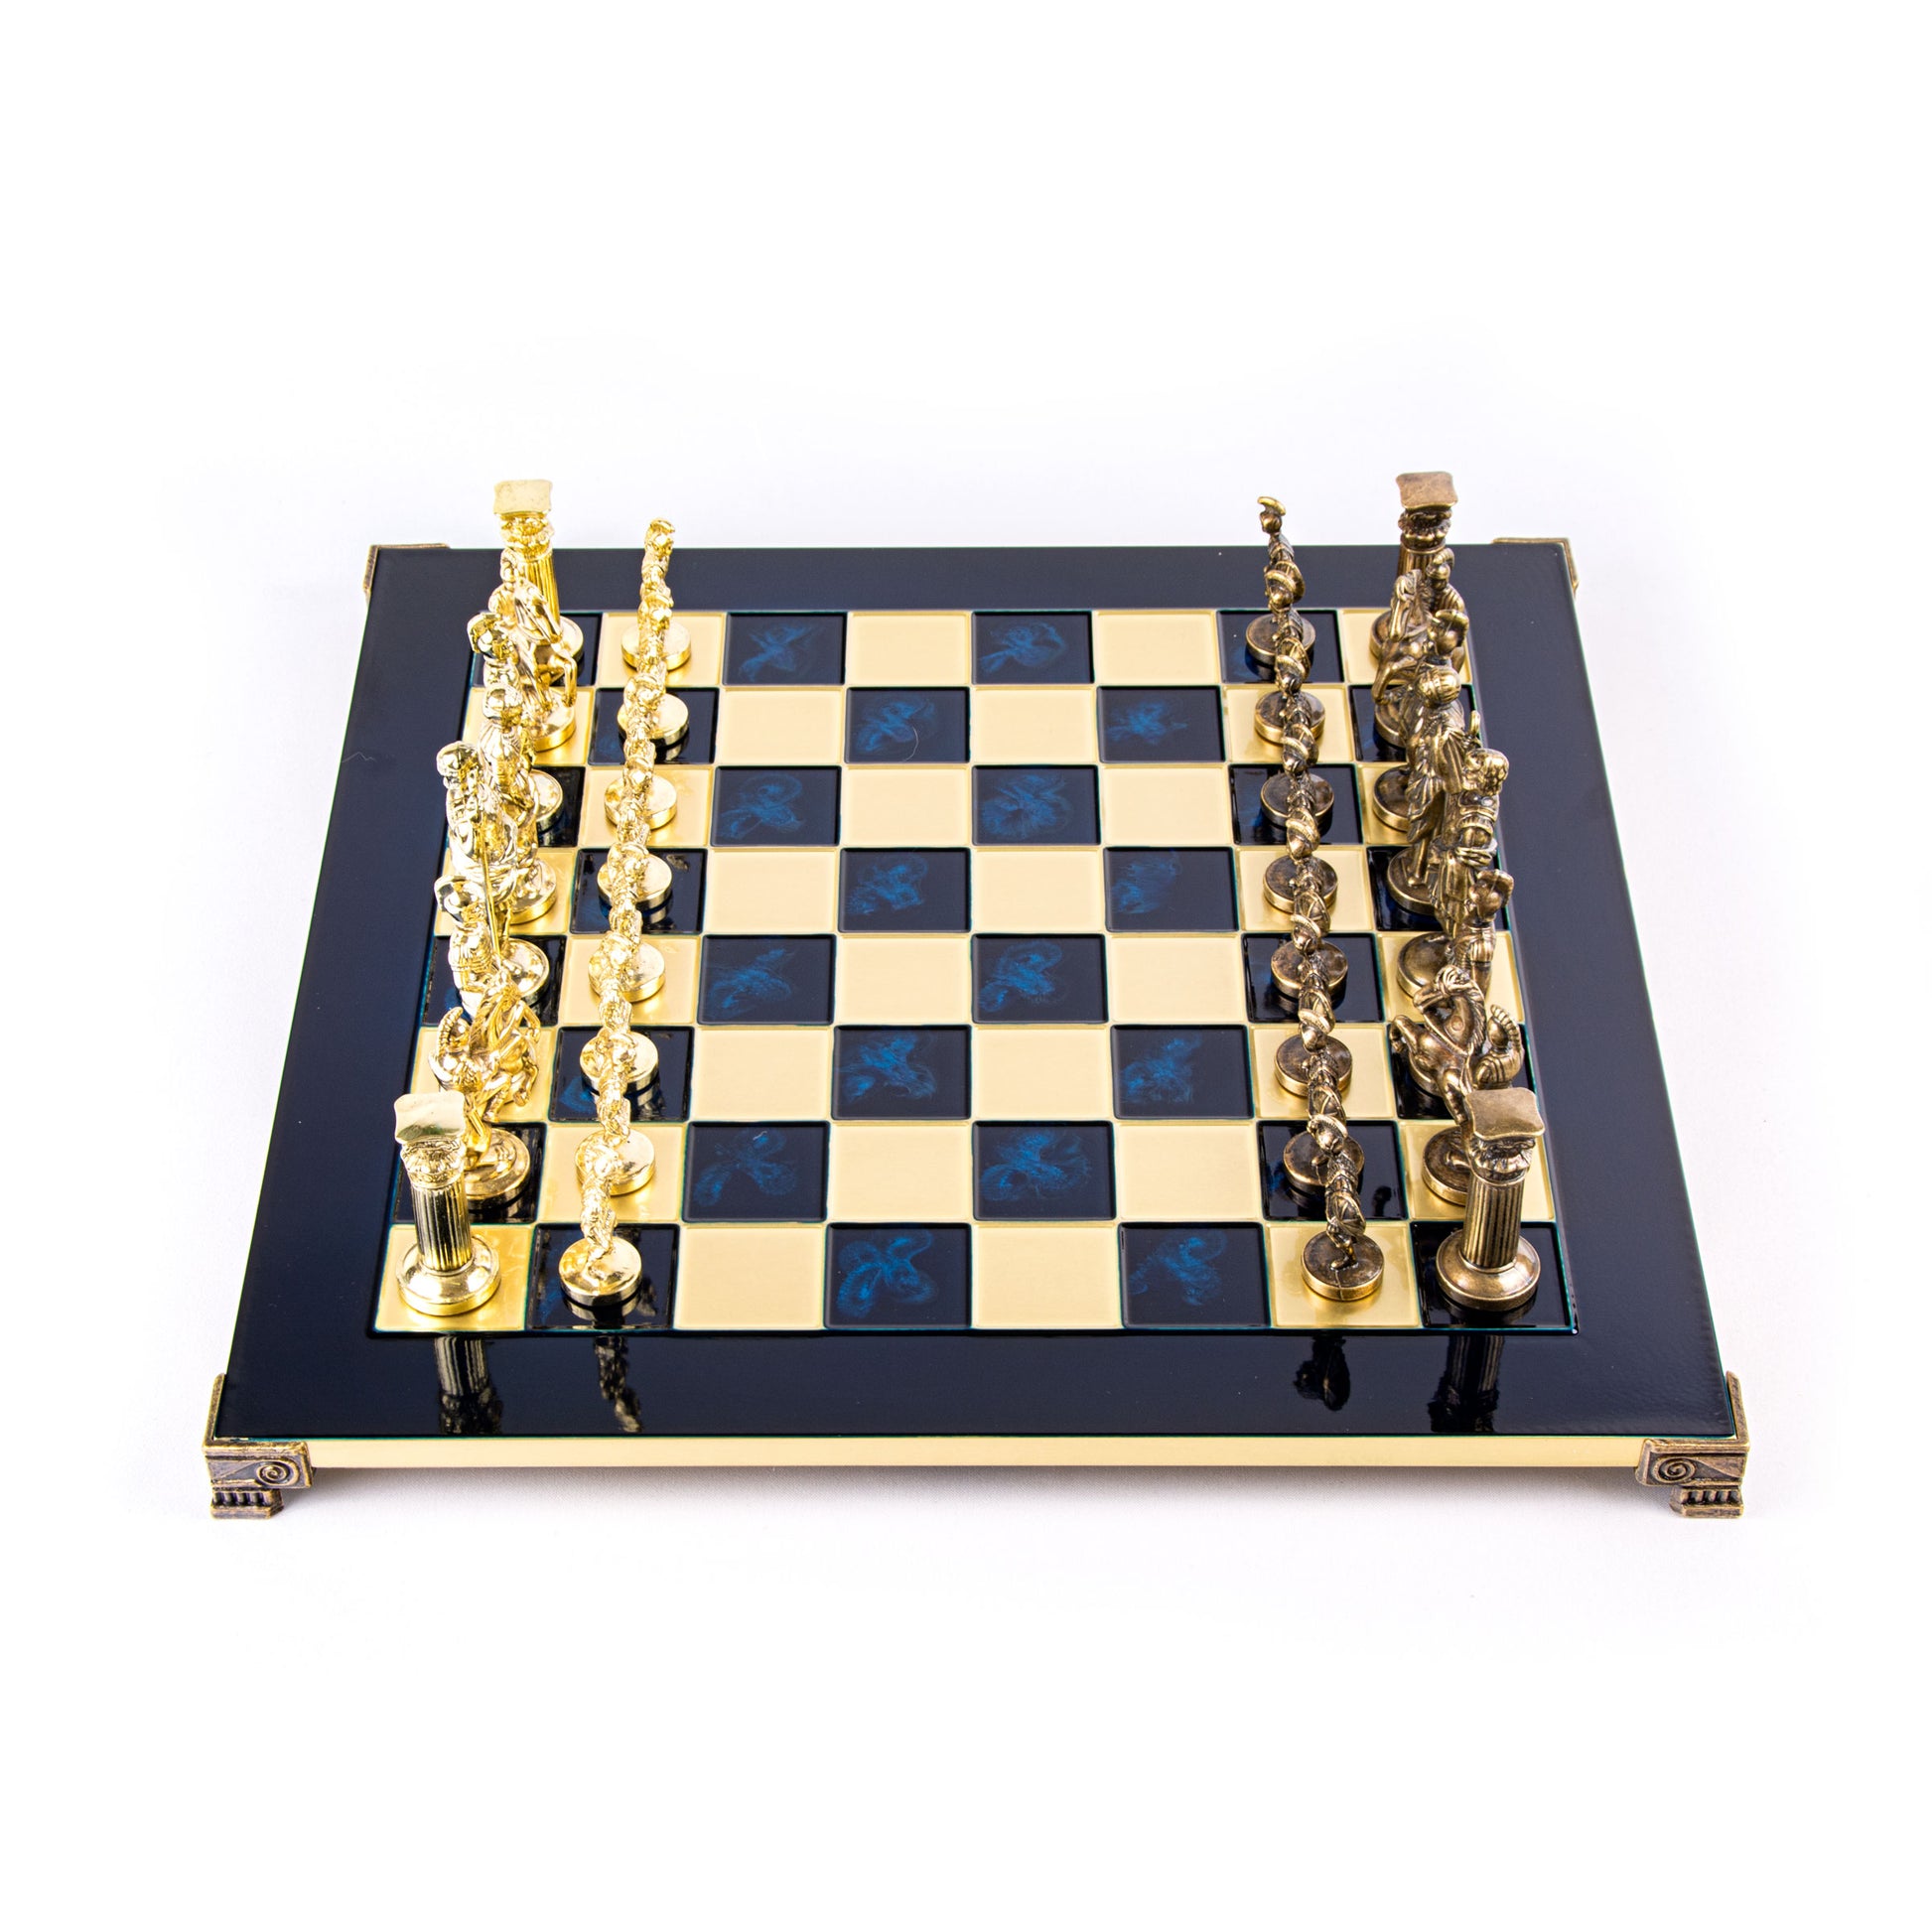 GREEK ROMAN PERIOD CHESS SET with gold/brown chessmen and bronze chessboard 44 x 44cm (Large) - Premium Chess from MANOPOULOS Chess & Backgammon - Just €275! Shop now at MANOPOULOS Chess & Backgammon